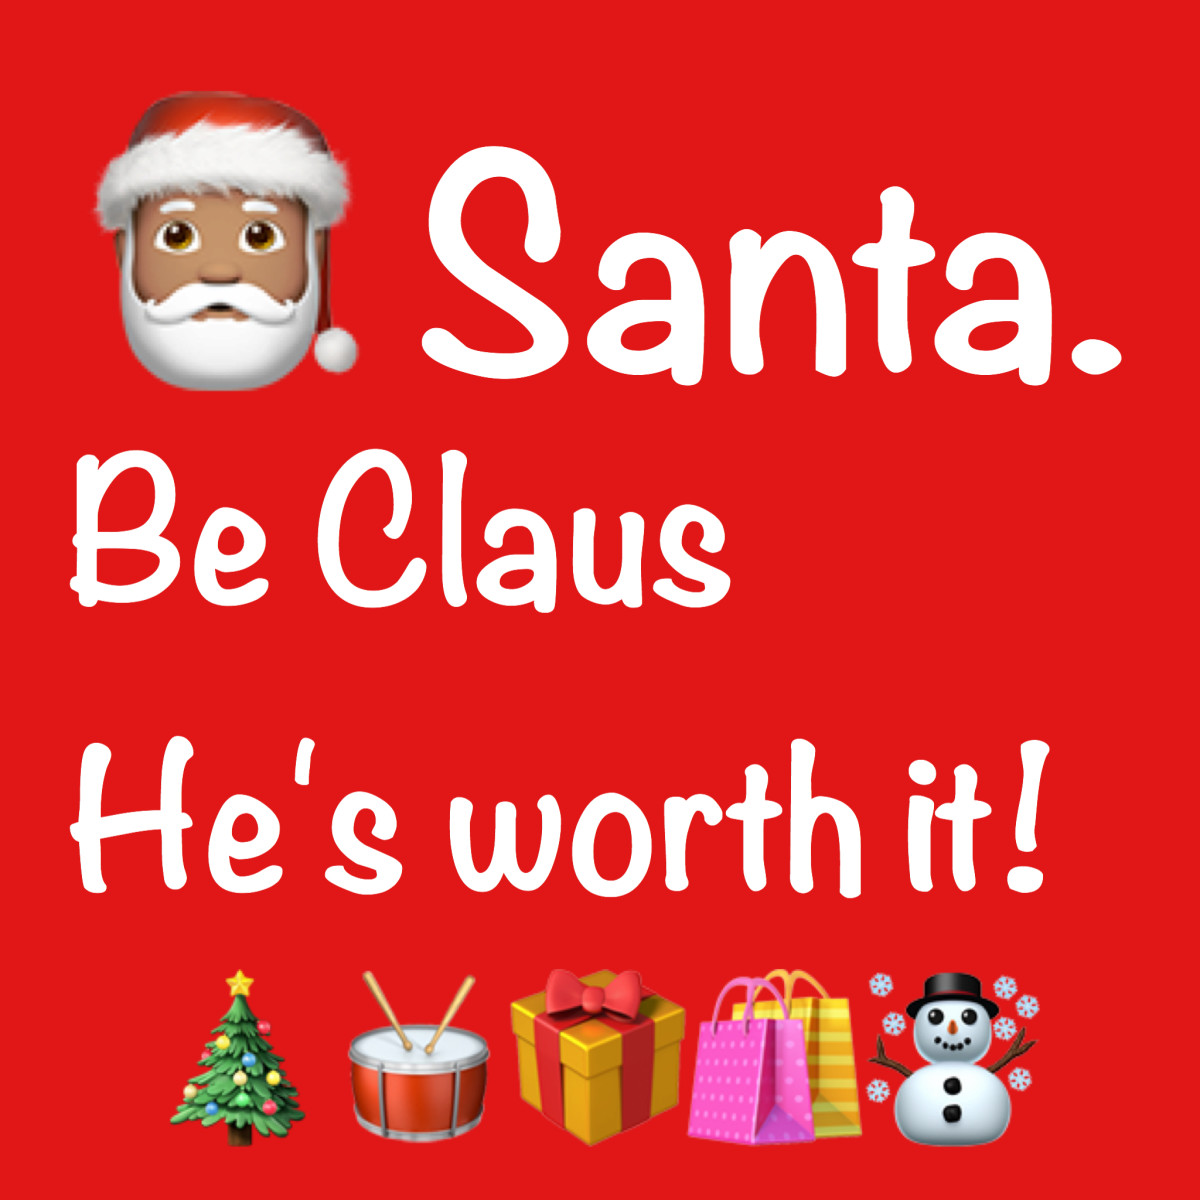 Dear Santa Christmas Quotes And Status Updates Hubpages